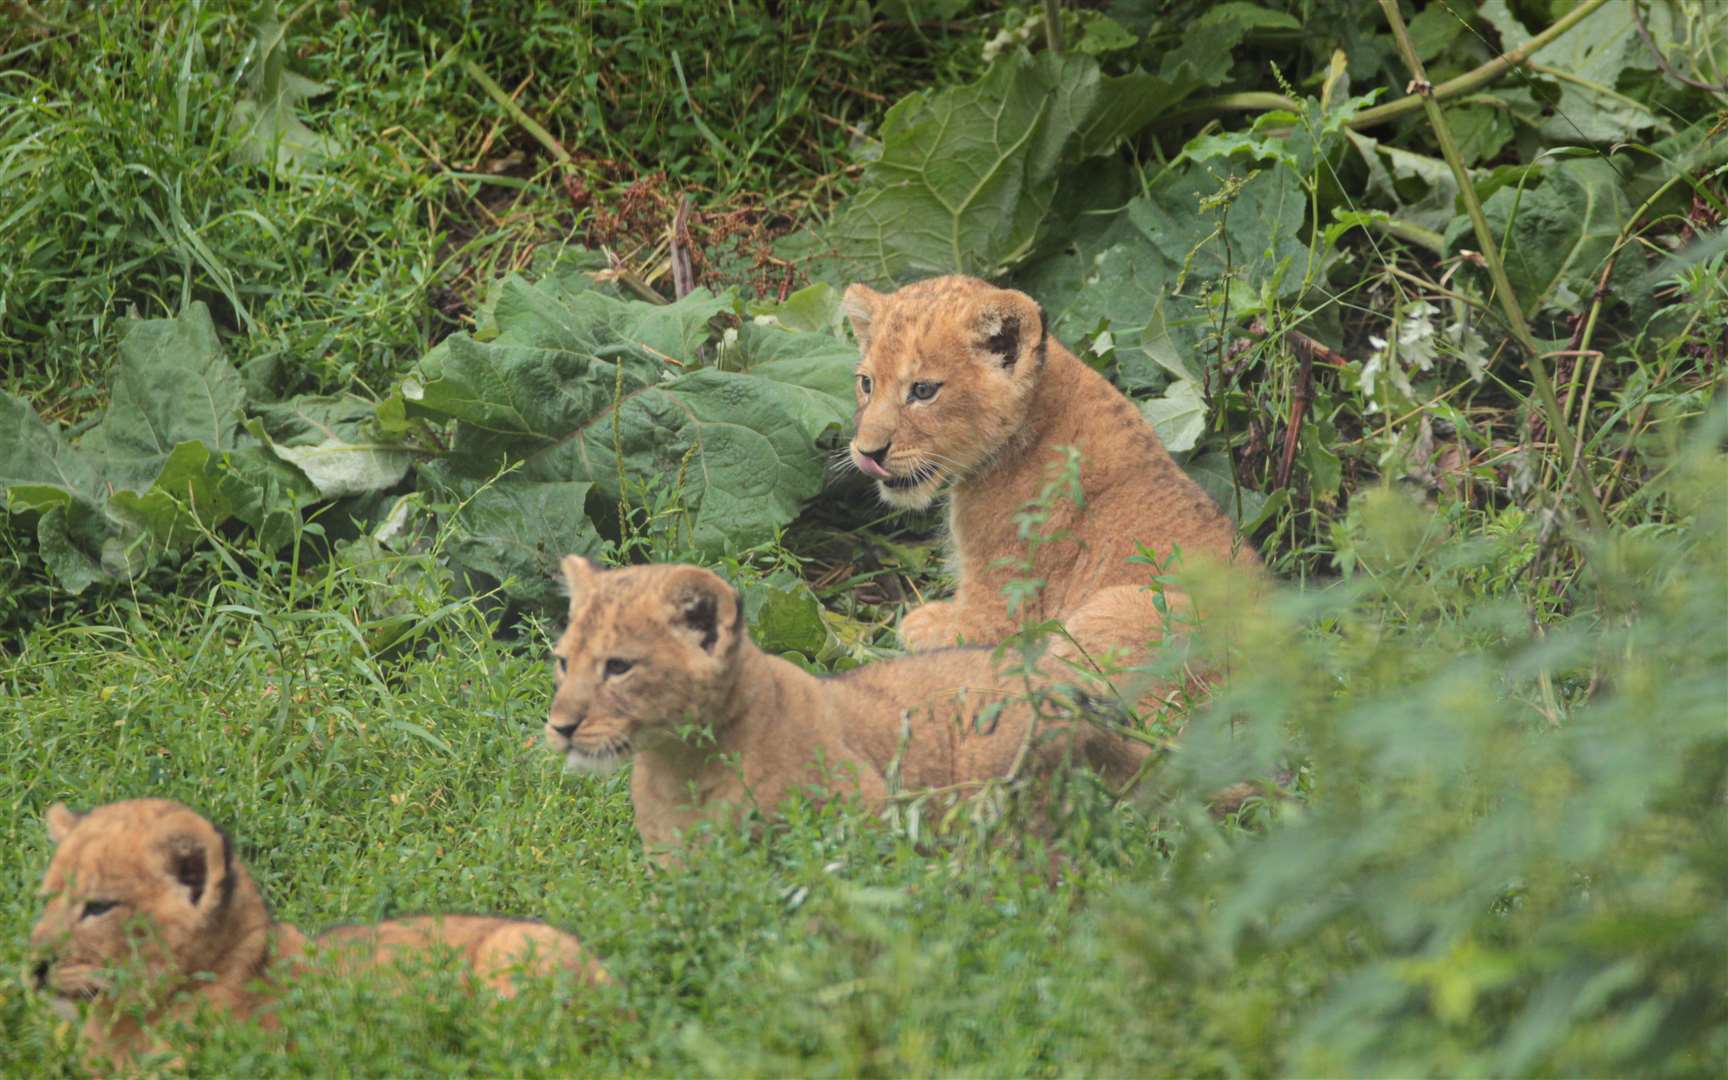 They were born to third time parents Oudrika and Adras. Photo: David Rolfe